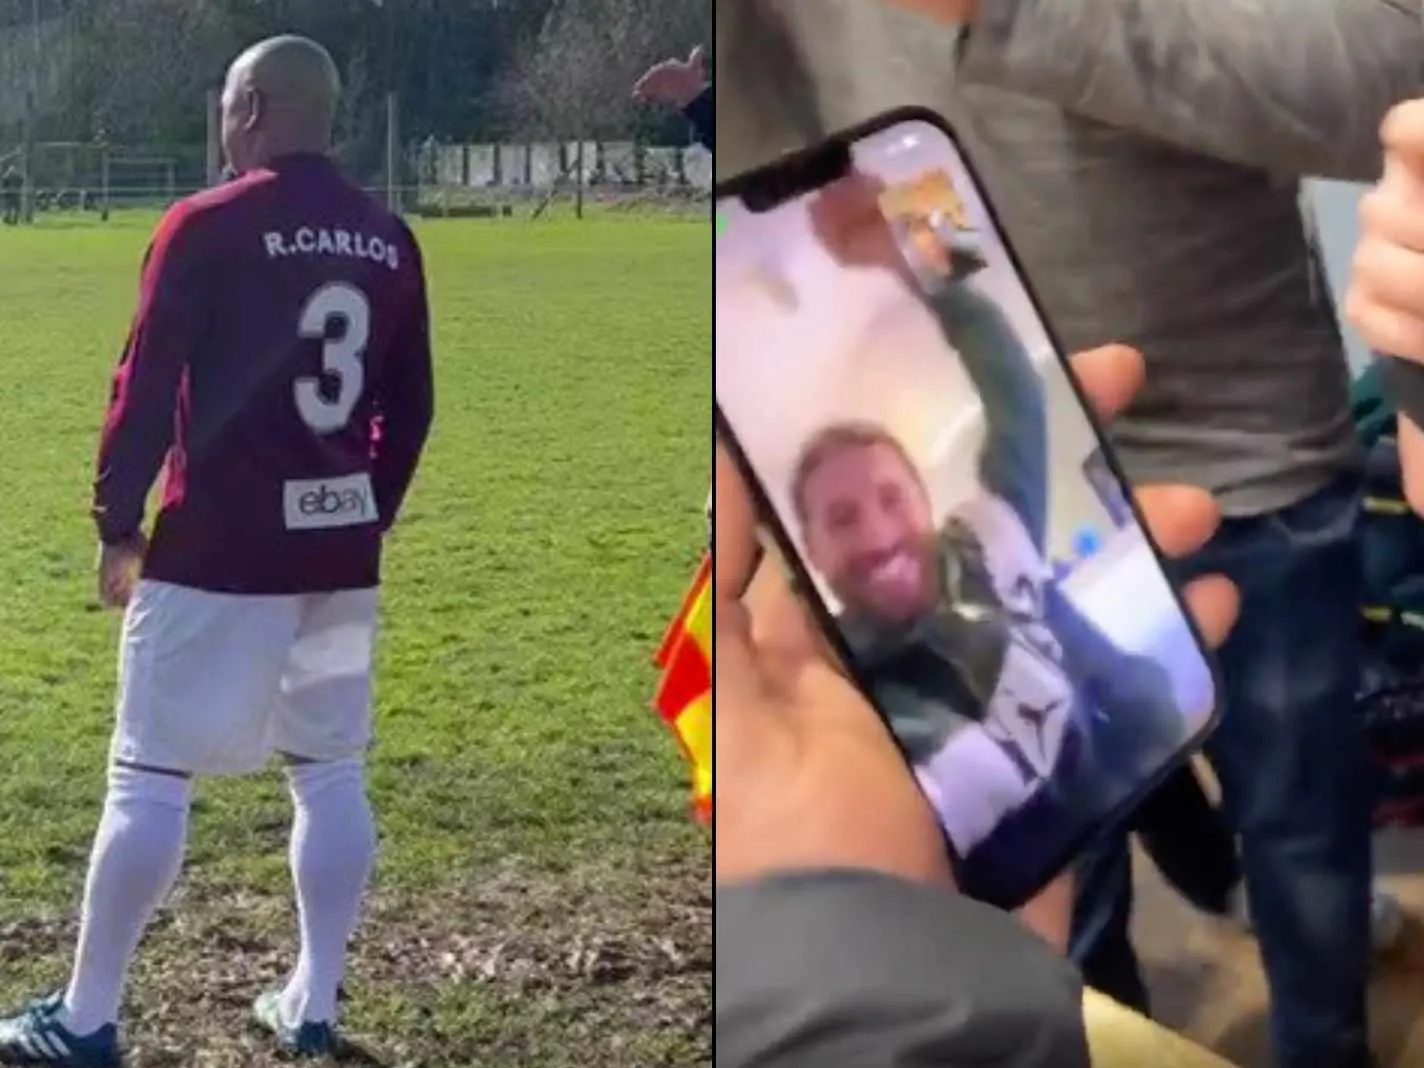 Roberto Carlos gives pub patrons unforgettable moment by facetiming Sergio Ramos after making his Sunday League debut with Bull in the Barne United